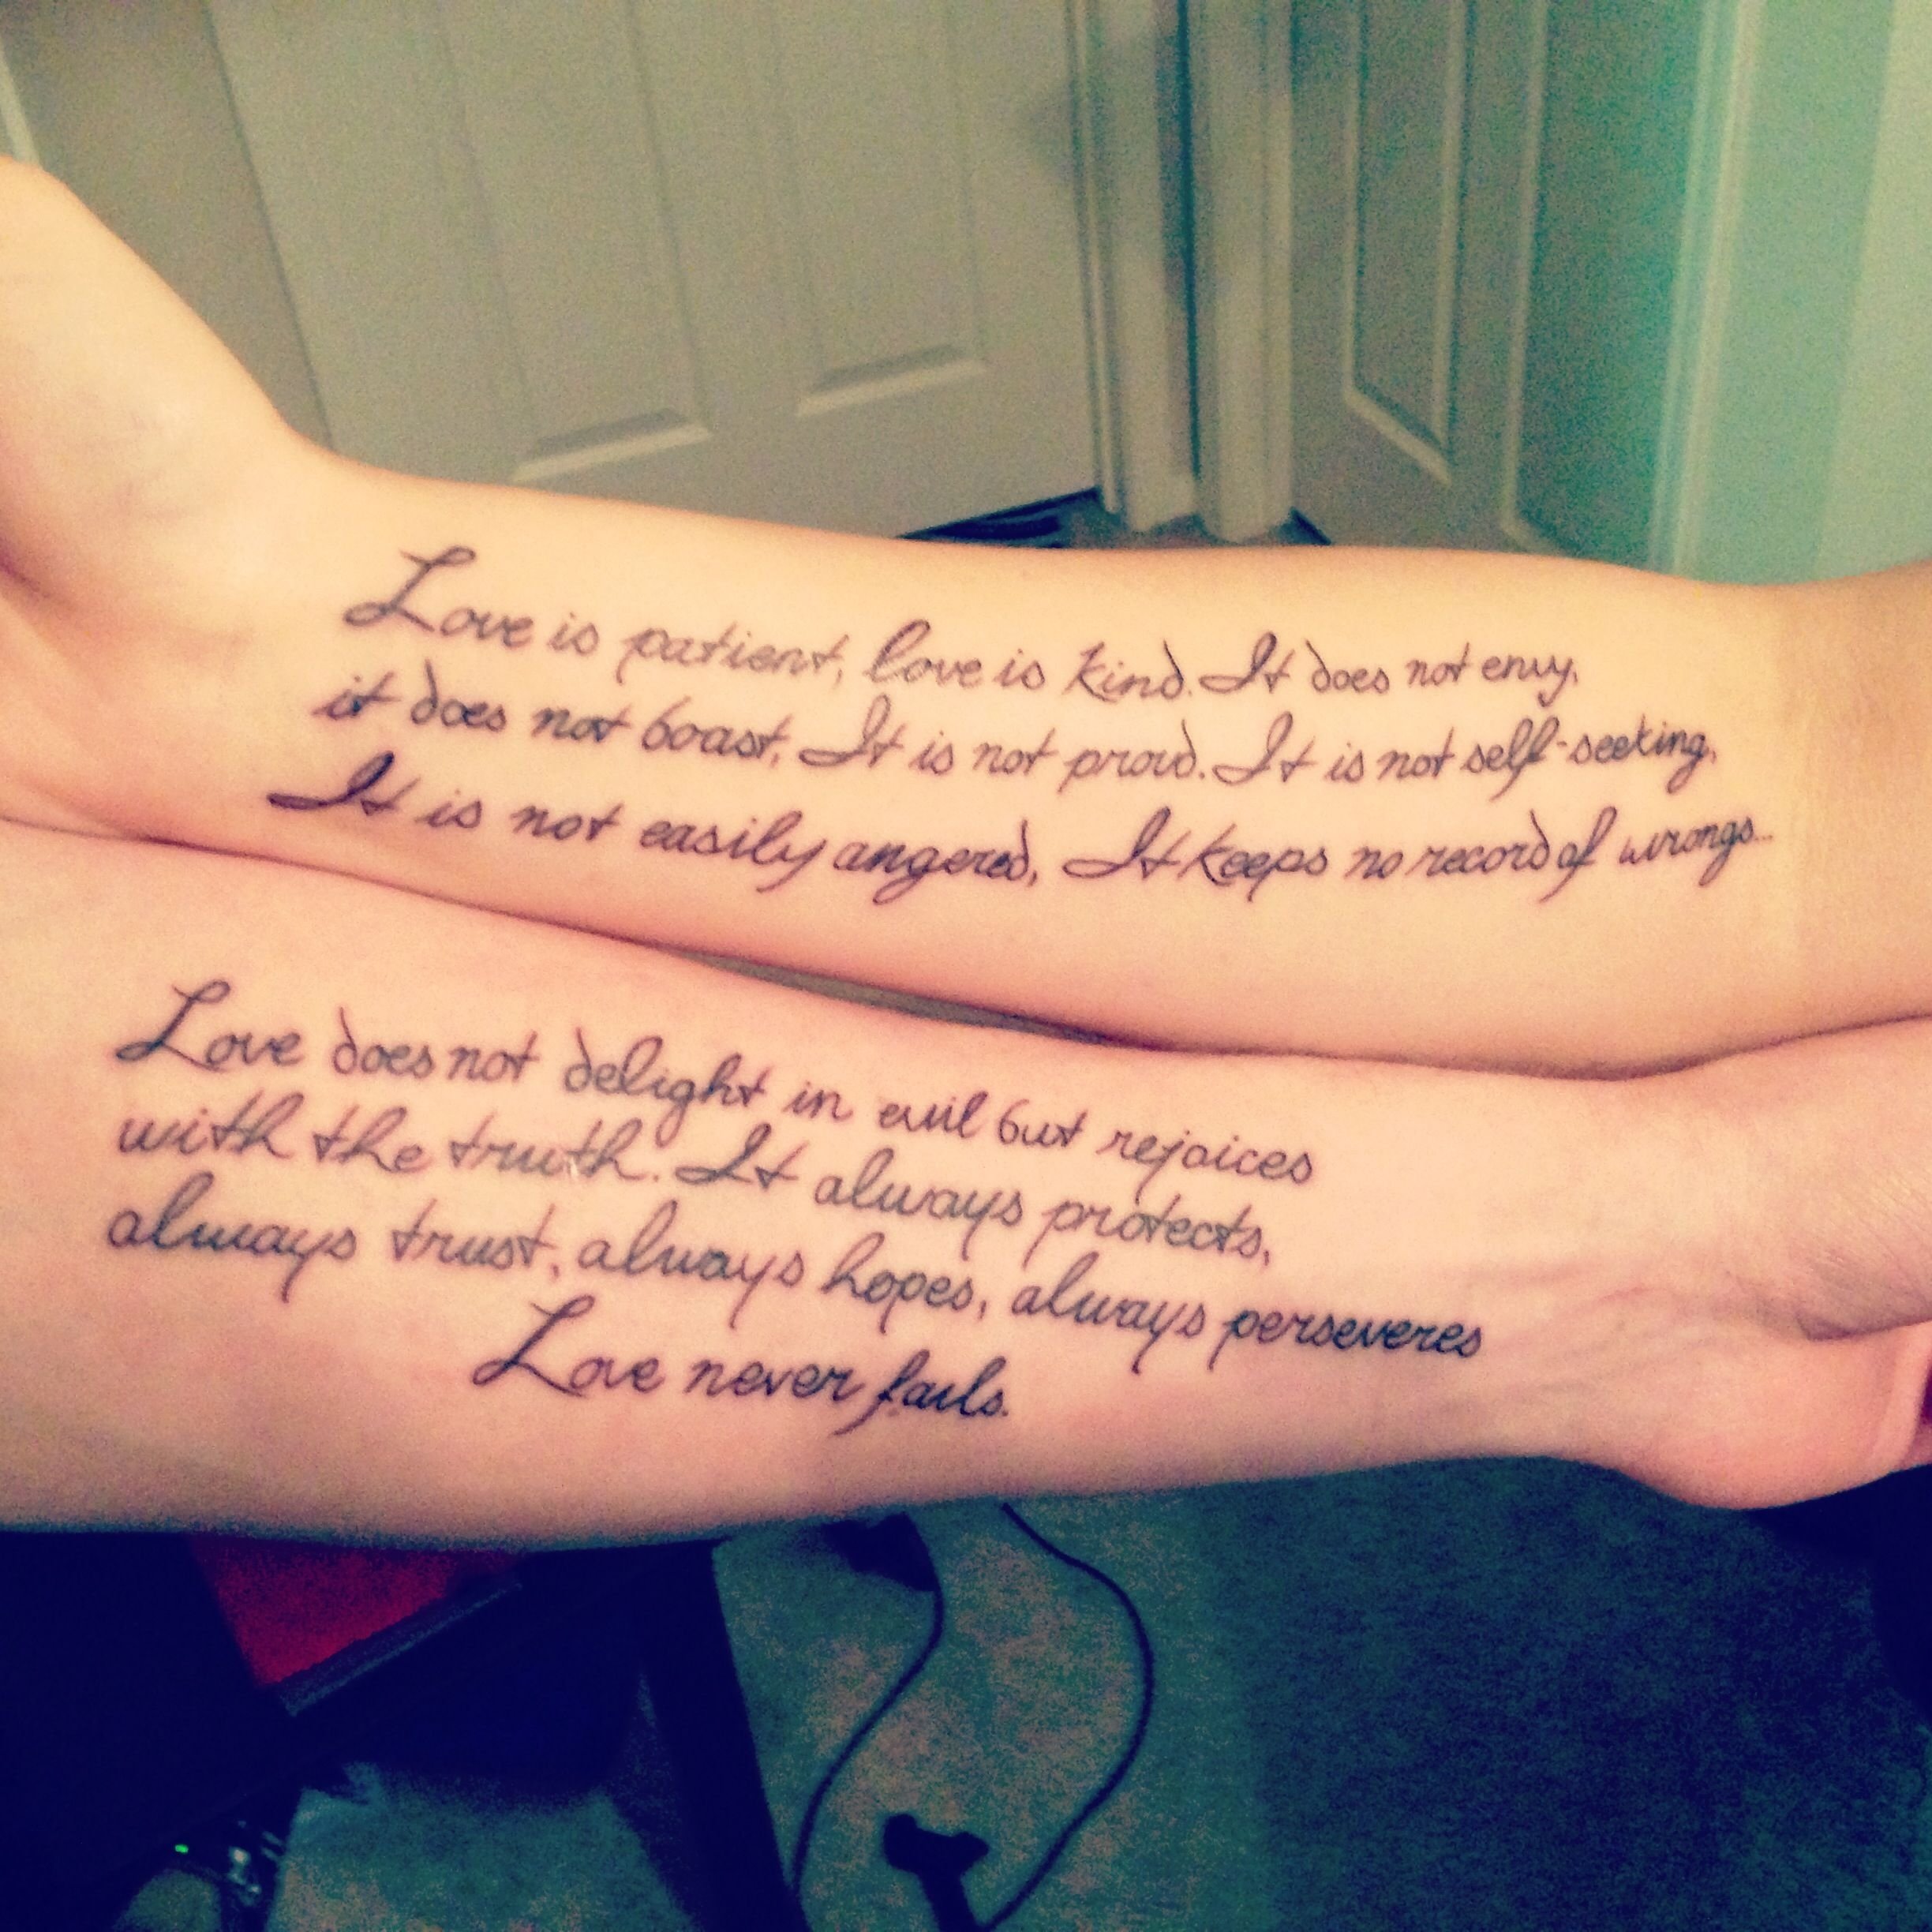 10 Attractive Tattoo Ideas For Married Couples super sweet couples tattoo idea im not sure id want it quite so 2022